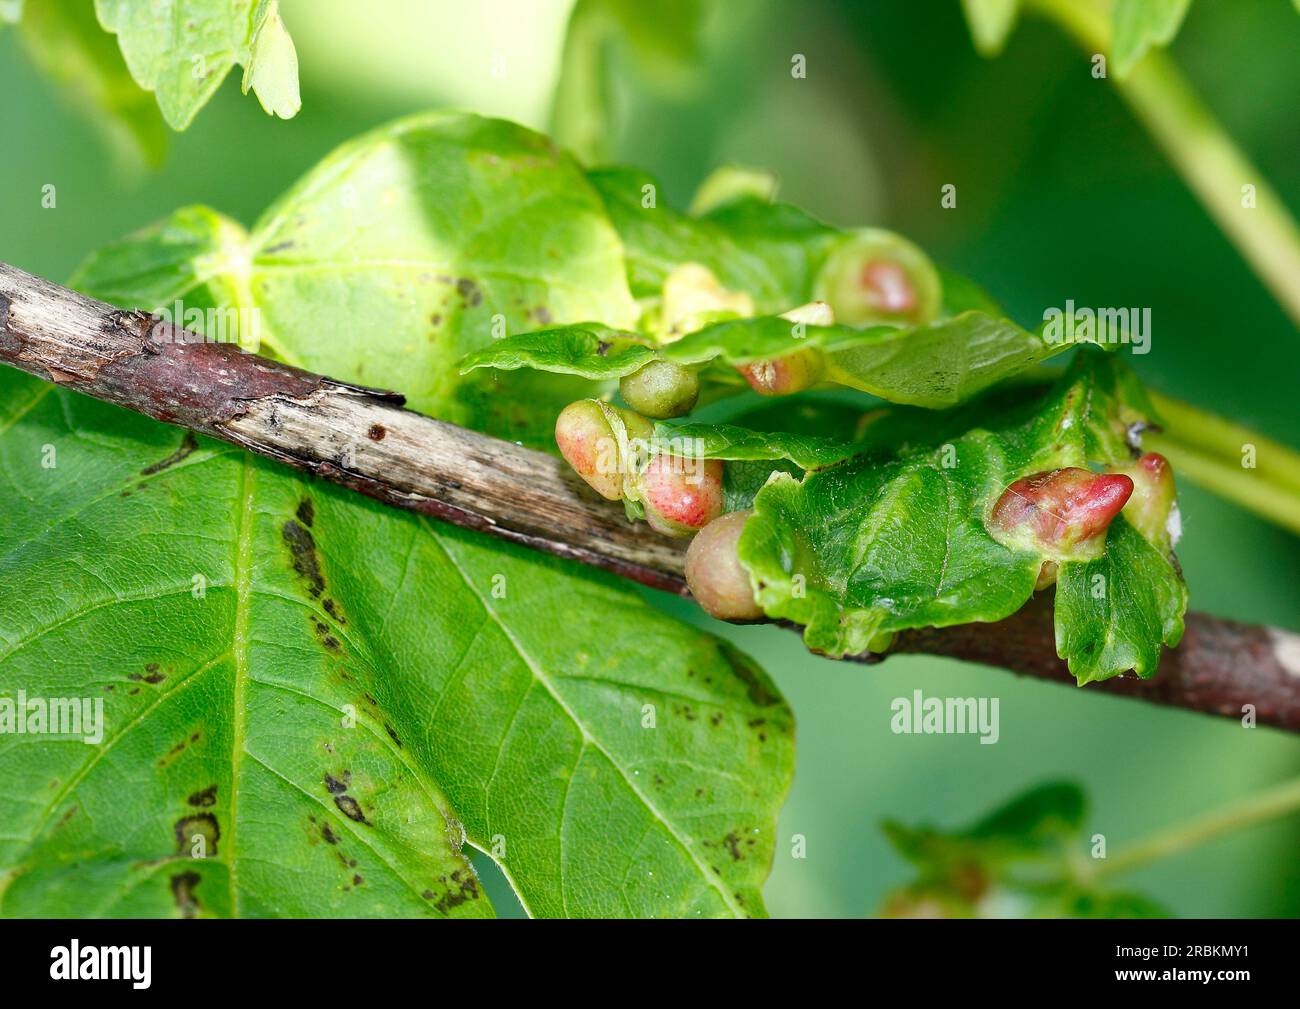 acer gall mite, Eriophyid mite (Aceria macrorhyncha, Aceria macrorhynchus), galls on a leaf of Sycamore maple, Acer pseudoplatanus, Germany Stock Photo